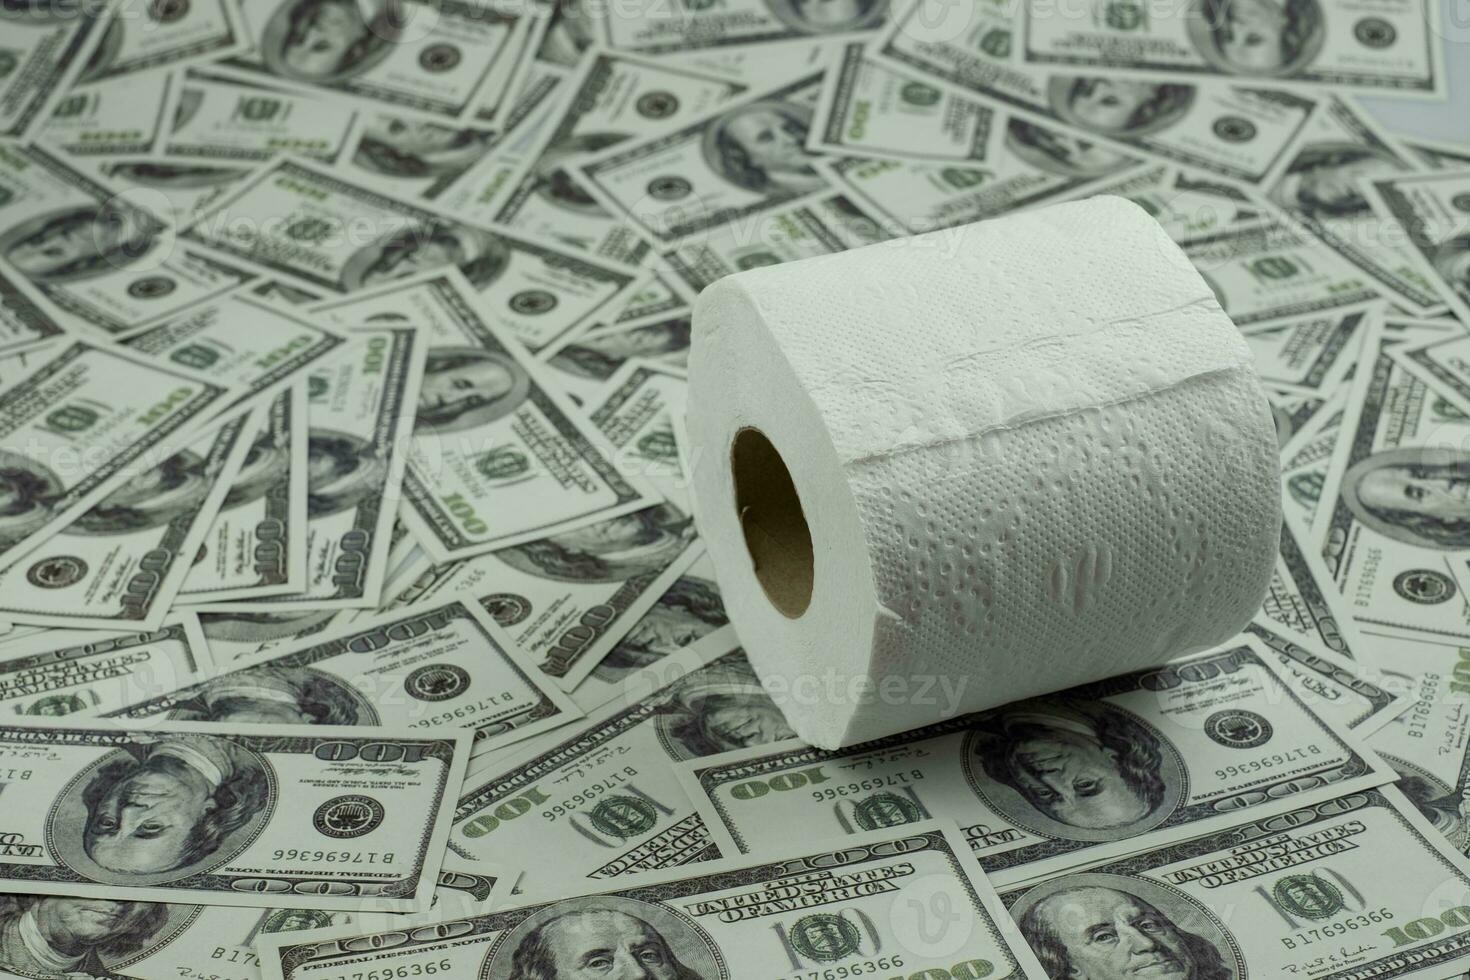 Toilet paper tissue and money of stack 100 US dollars banknote a lot of texture background, That was It costs expensive price and high priced products concept photo